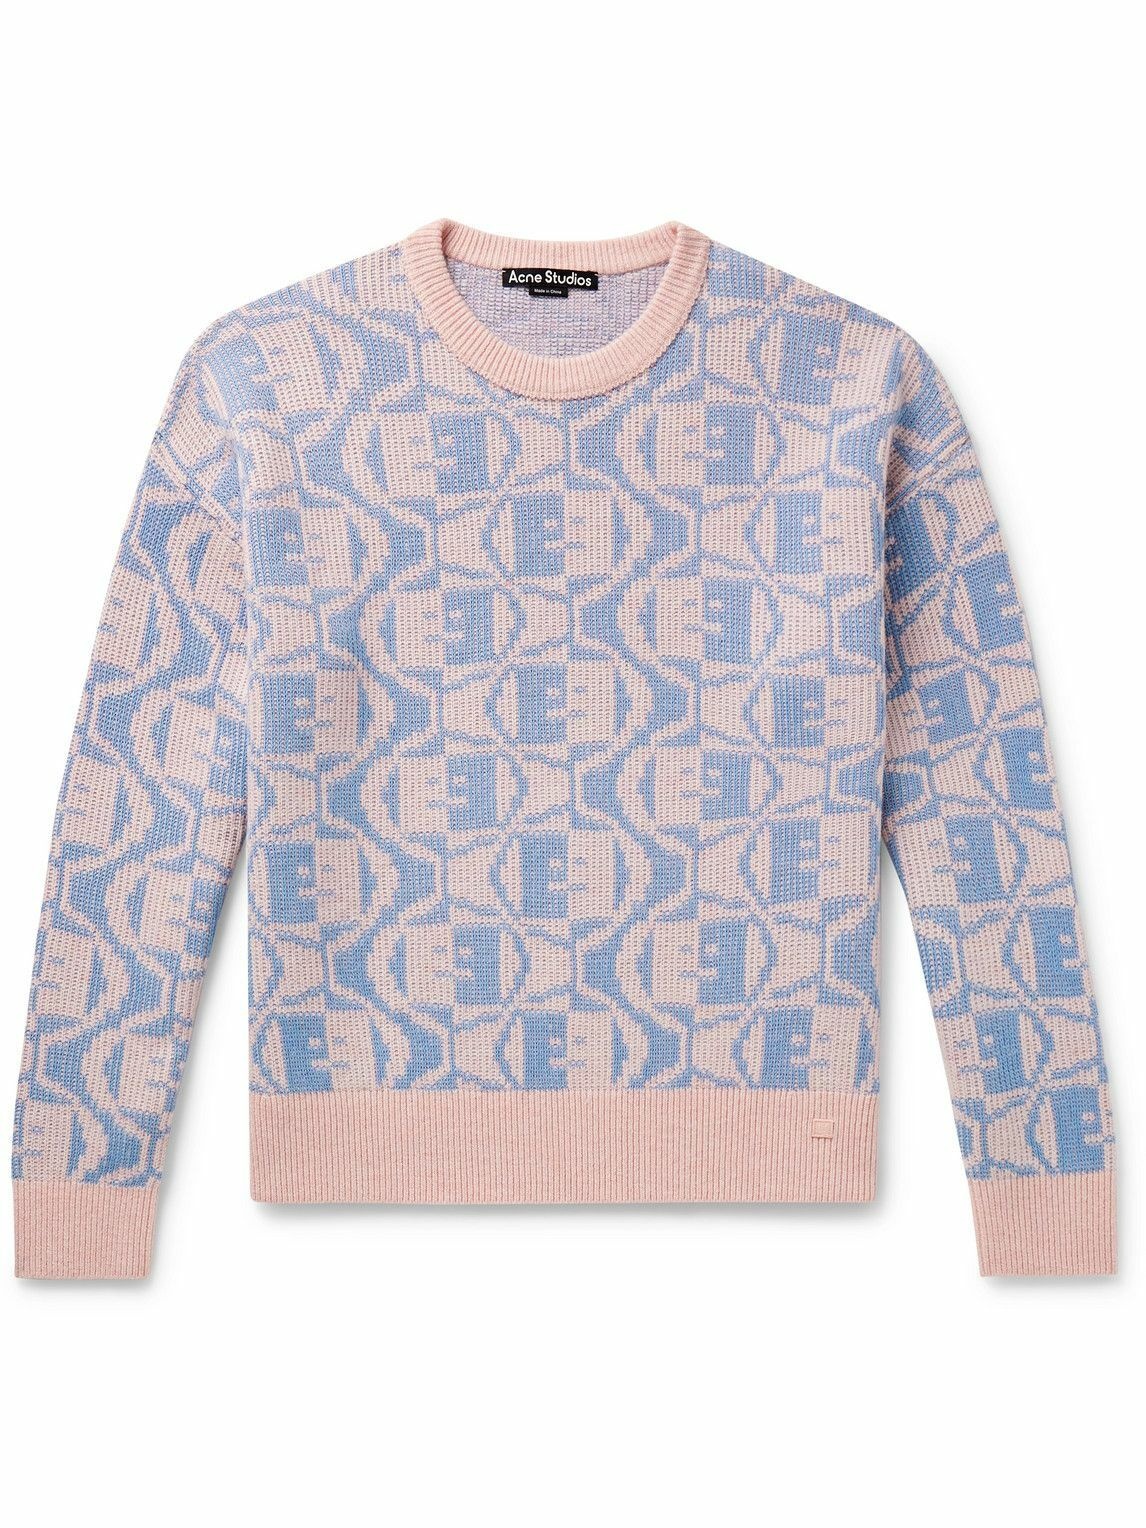 Acne Studios - Katch Jacquard-Knit Wool and Cotton-Blend Sweater - Pink  Acne Studios